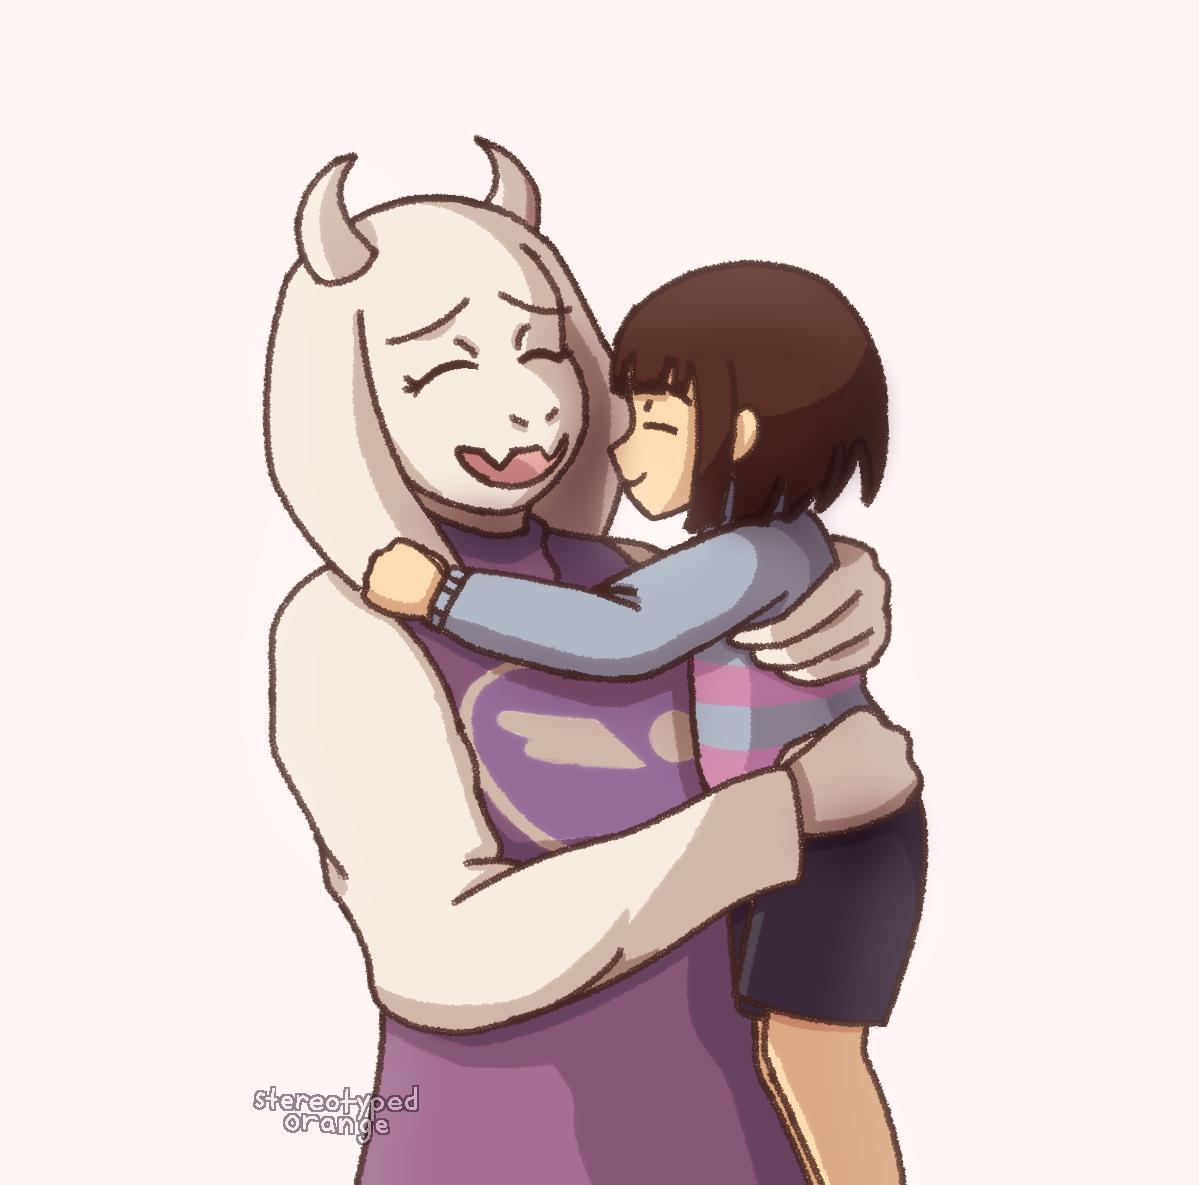 goats are hard to draw and so are hands
it mom day yay
#goatmom #undertale #torielundertale #undertaletoriel #friskundertale #undertalefrisk #toriel #frisk #hug #MothersDay